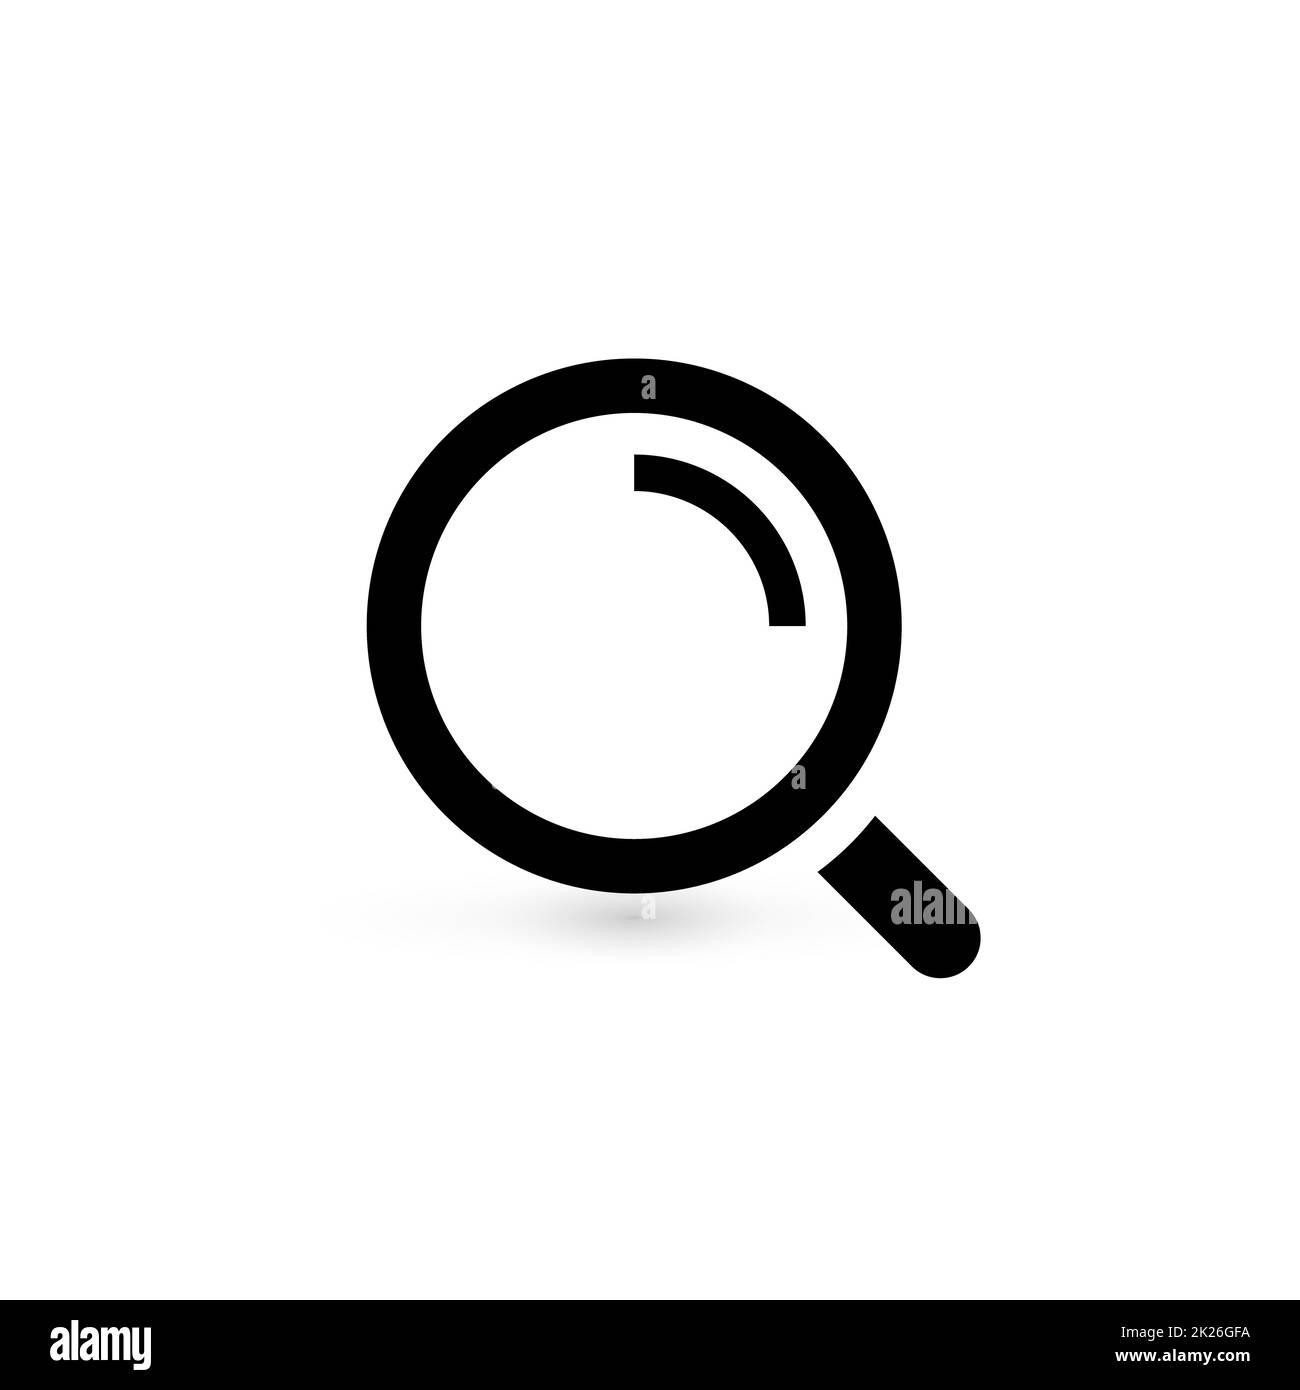 Search icon, SEO of big data symbol, web navigation sign, line style simple magnifier graphic element, magnifying glass logo template, isolated illustration. Stock Photo